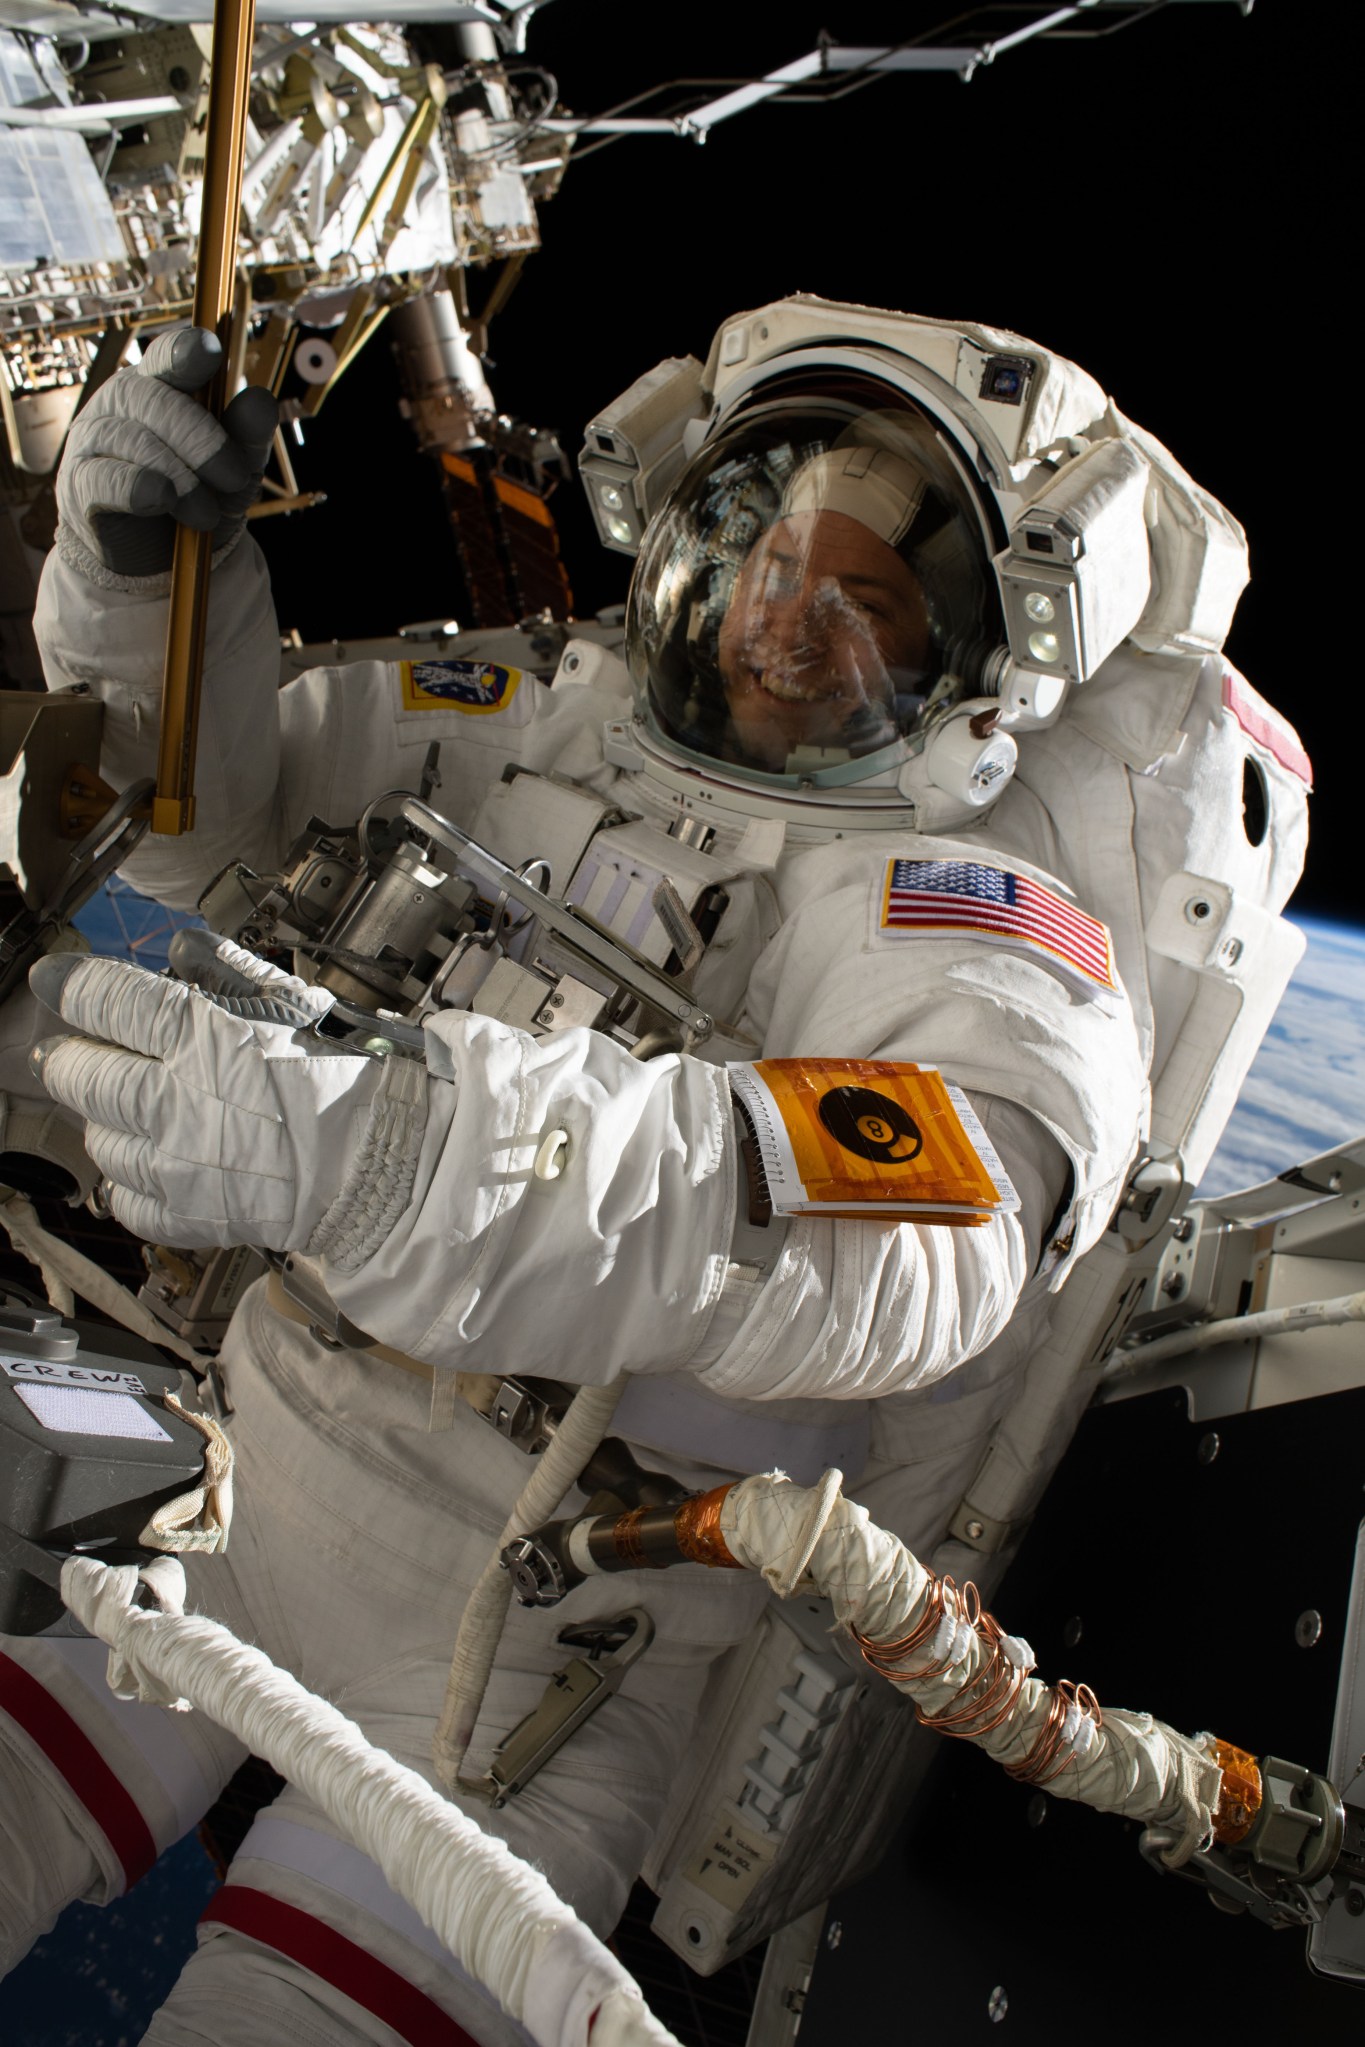 NASA astronaut Nick Hague participates in his second spacewalk to upgrade the International Space Station's power storage capacity. He and fellow spacewalker Christina Koch (out of frame) of NASA worked outside in the vacuum of space for six hours and 45 minutes to continue swapping batteries and install adapter plates on the station's Port-4 truss structure.